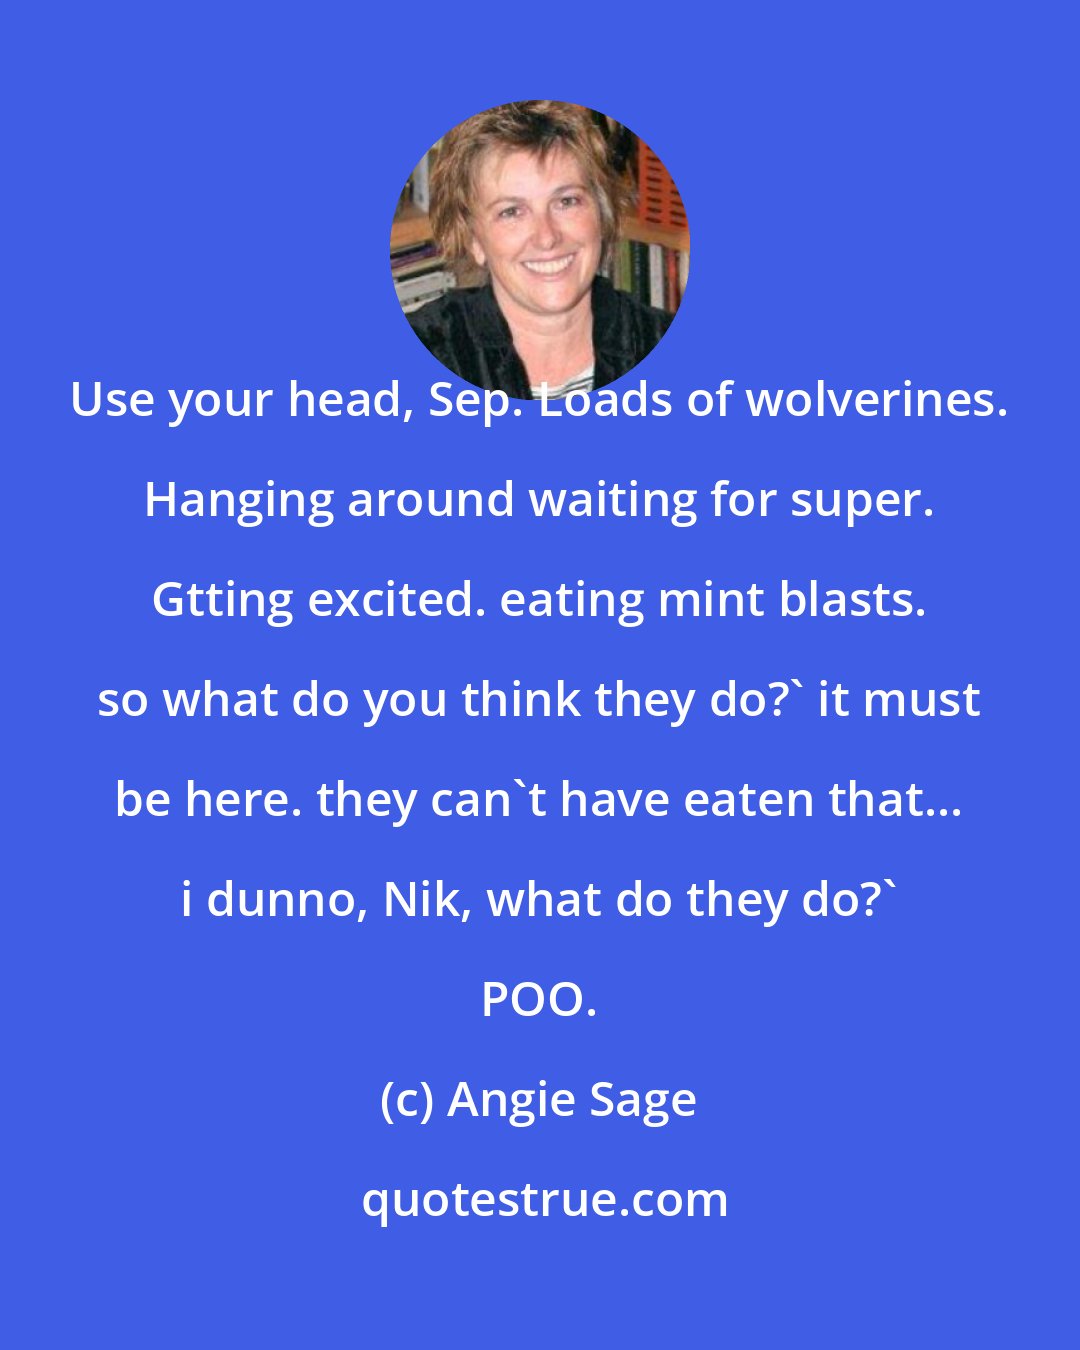 Angie Sage: Use your head, Sep. Loads of wolverines. Hanging around waiting for super. Gtting excited. eating mint blasts. so what do you think they do?' it must be here. they can't have eaten that... i dunno, Nik, what do they do?' POO.